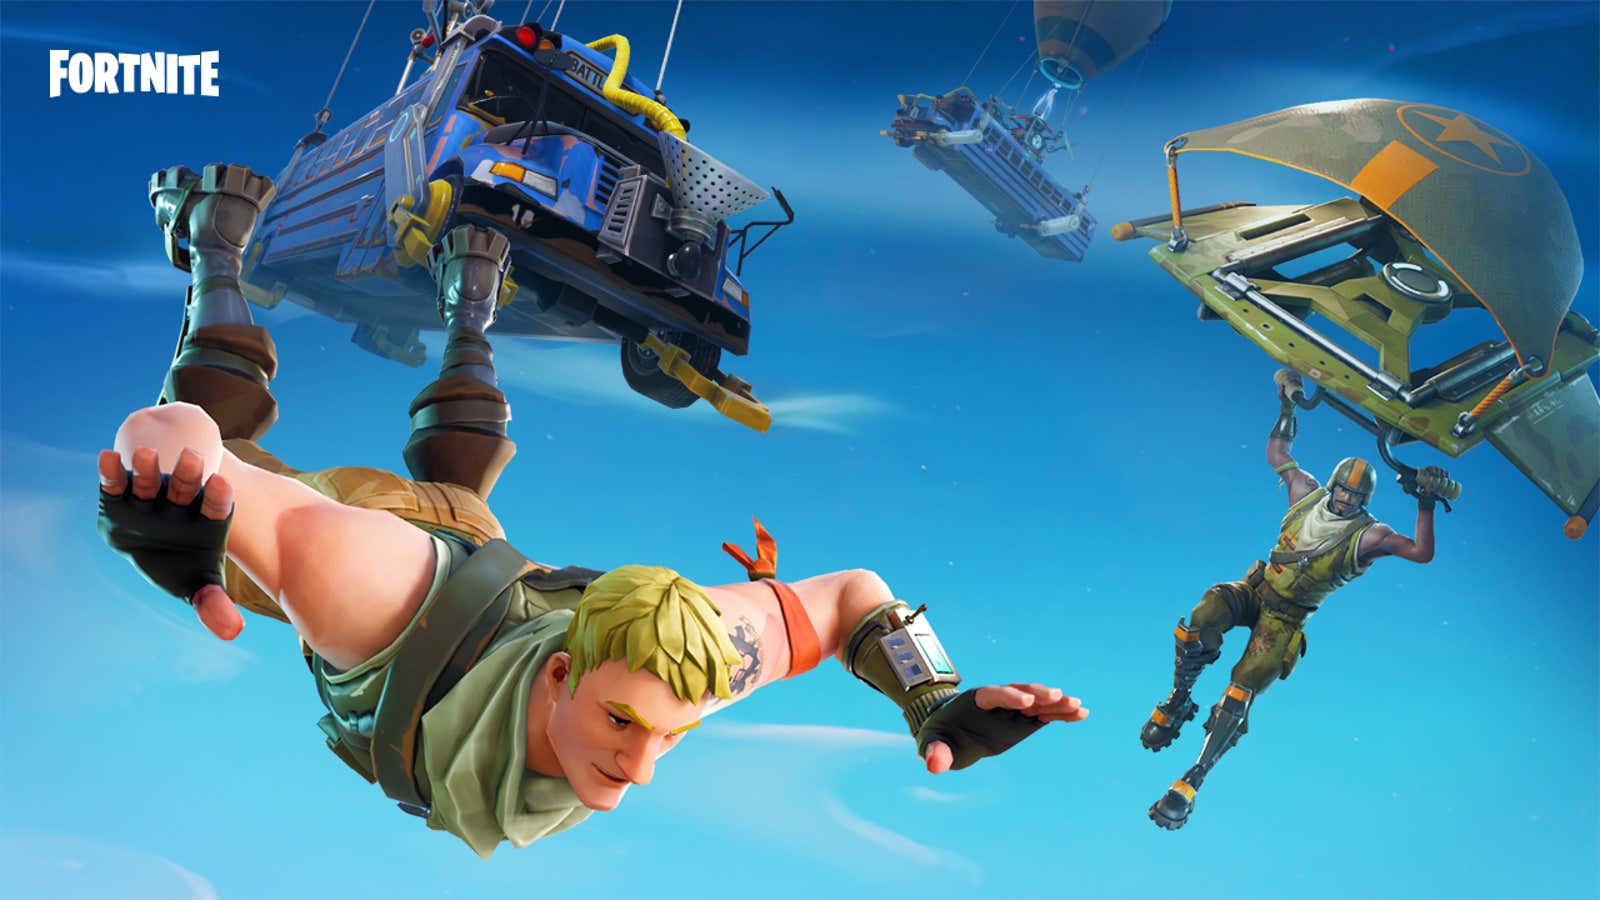 Fortnite Battle Royale’s newest weapon is the stink bomb.